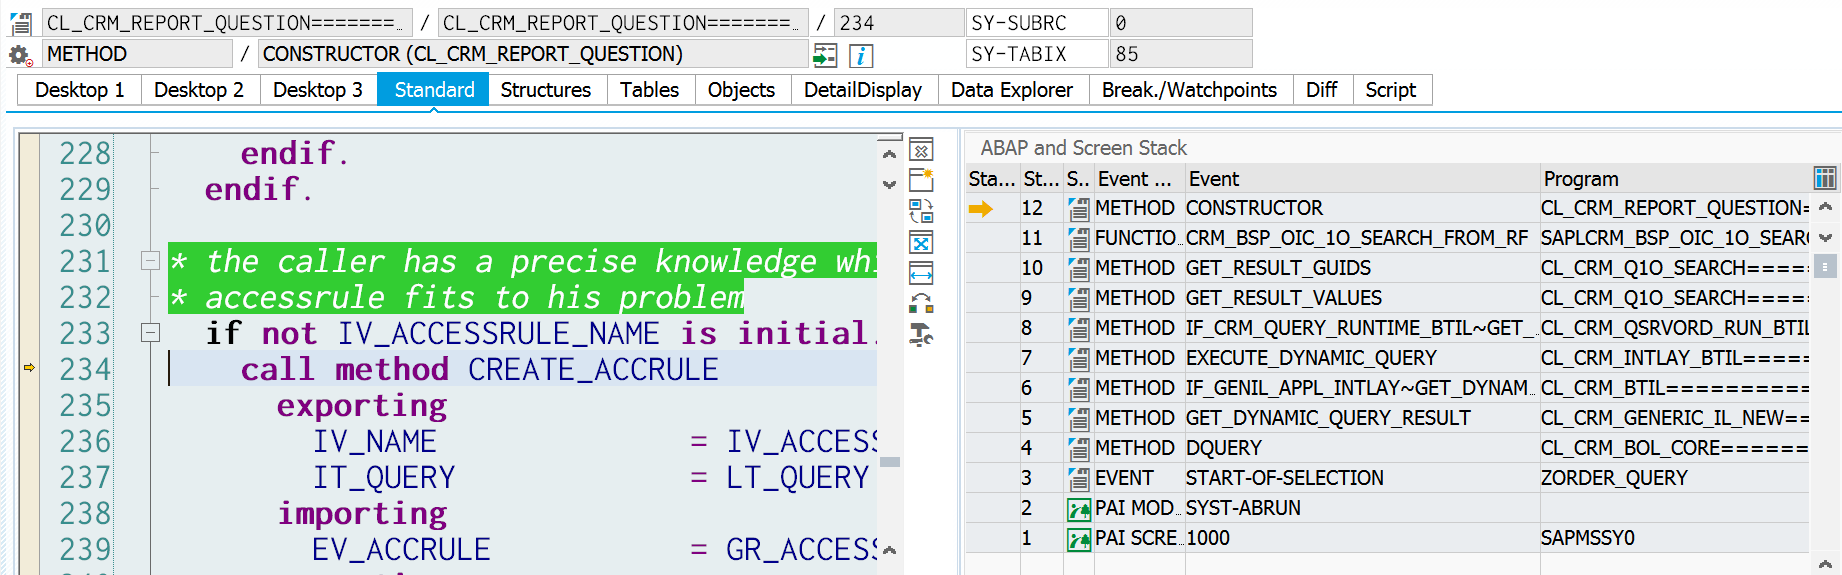 CL_CRM_REPORT_ACCRULE_ONEORDER_CRM_02